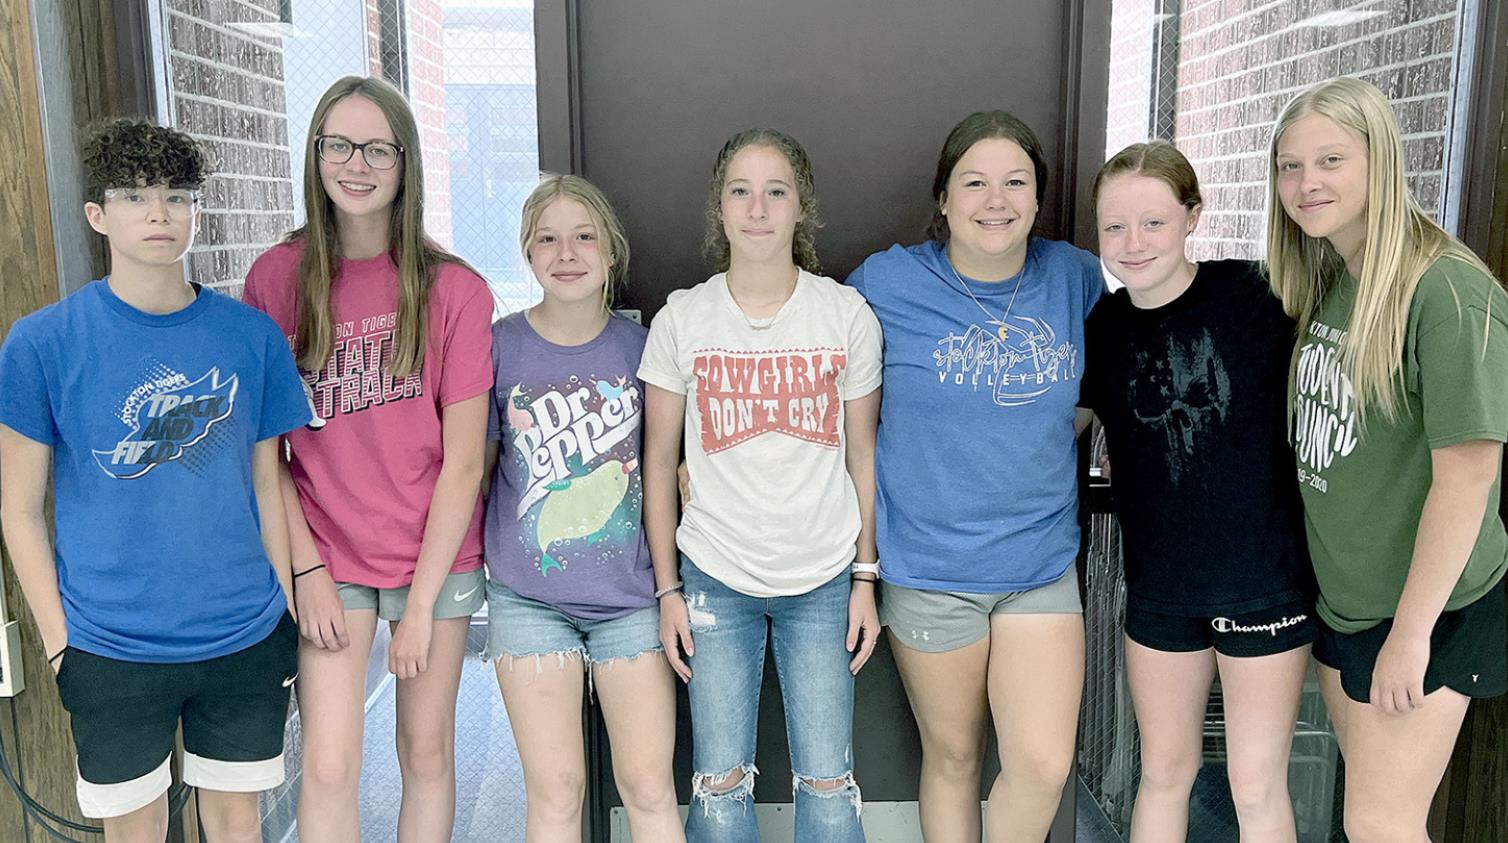 EIGHTH-GRADE GIRLS from Stockton scoring points at the MCEL Track Meet were, from left: Carolina Northup (100MH, 200MH, High Jump), Cheyenne Hoeting (3200M), Saj Snyder (4 x 100M Relay, 4 x 200M Relay), Temprance Northup (4 x 100M Relay, 4 x 200M Relay), Caydance Carter (Shot Put), Baileigh Balthazor (100M, Long Jump, 4 x 100M Relay, 4 x 200M Relay), and Karleigh Horn (Javelin). The girls placed seventh as a team. (Courtesy Photo)